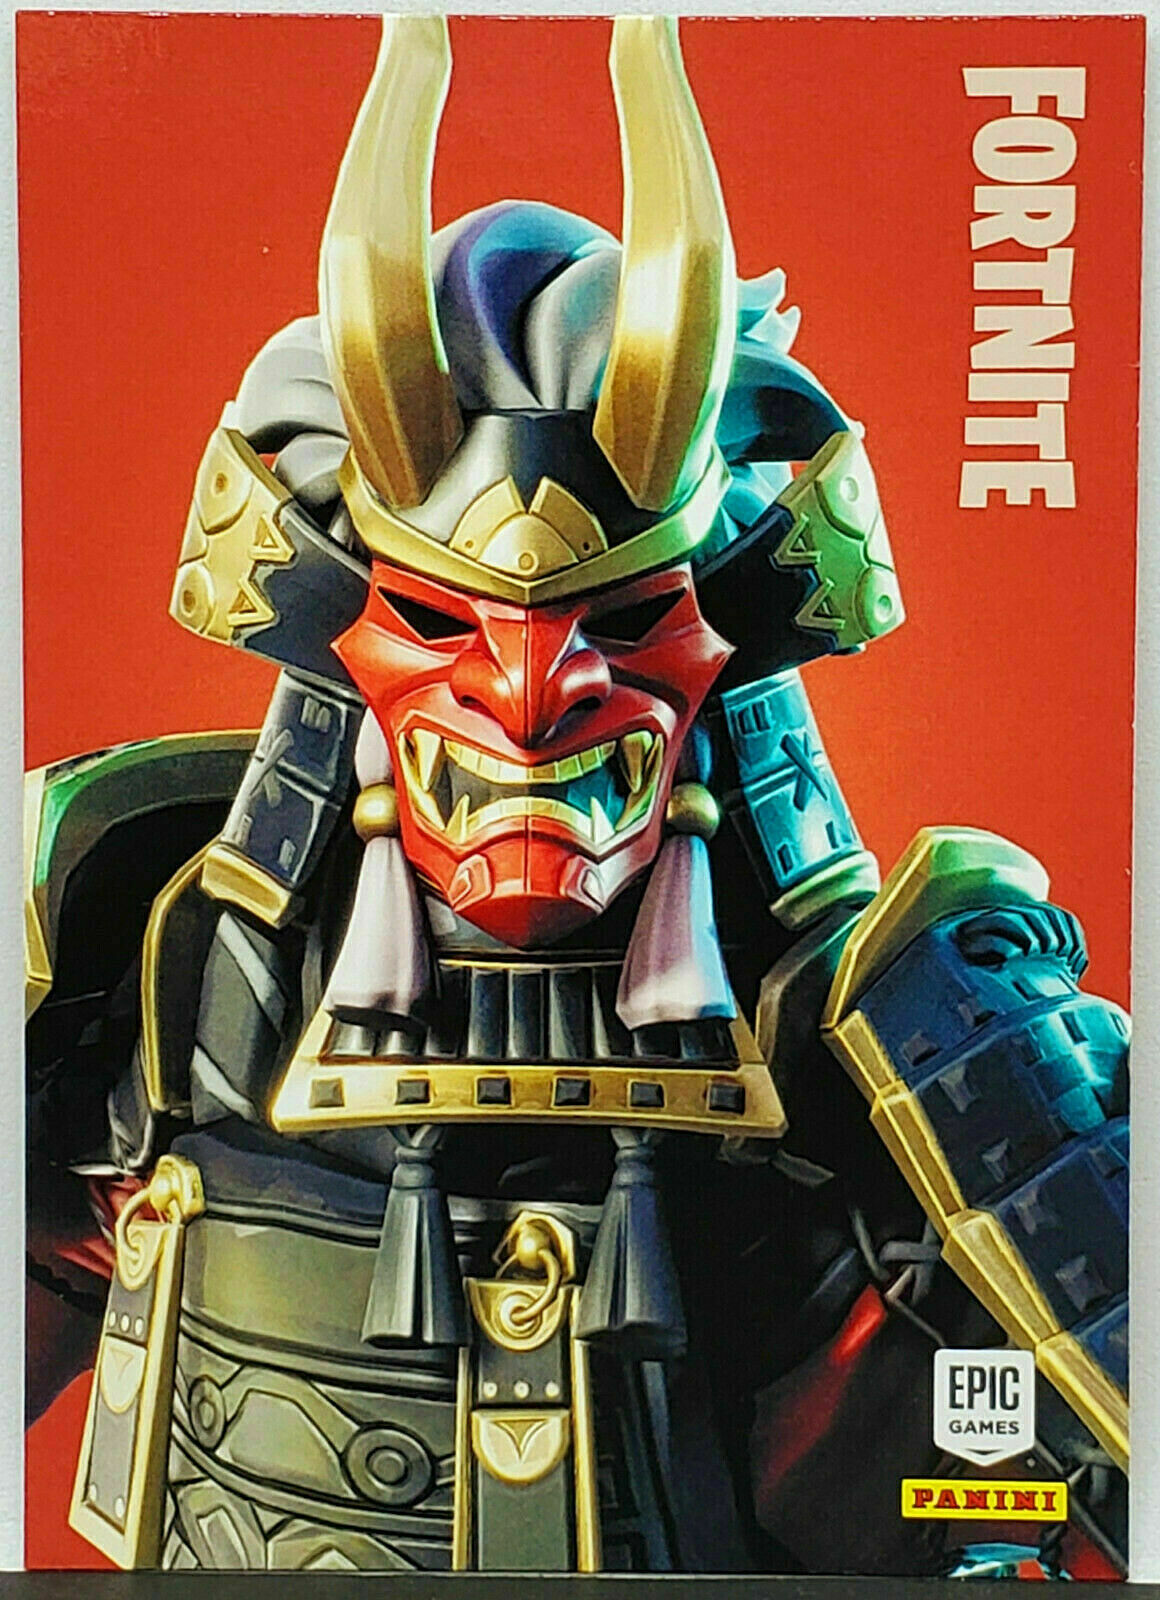 Primary image for  FORTNITE "SHOGUN" #288 LEGENDARY OUTFIT (1ST SERIES!) 2019 PANINI TRADING CARD!